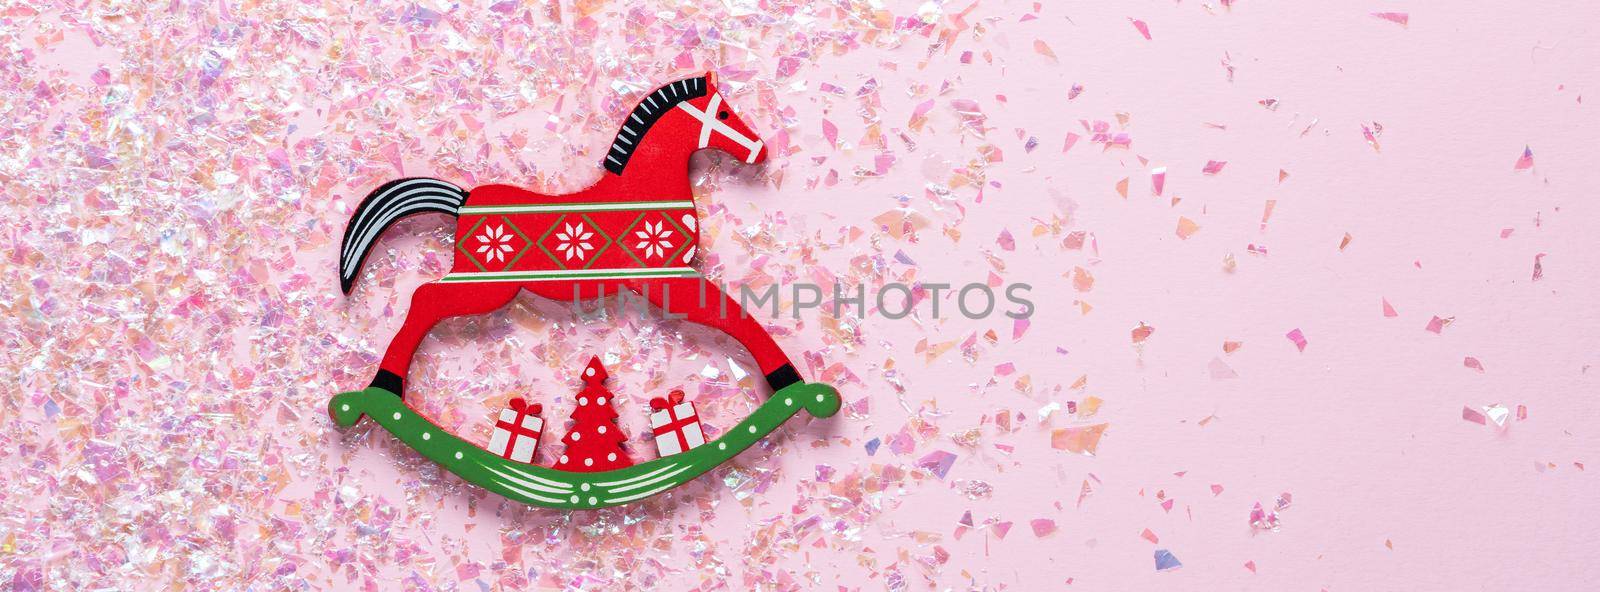 Christmas toy of rocking horse on pink background with glitter. flat lay by Mariakray